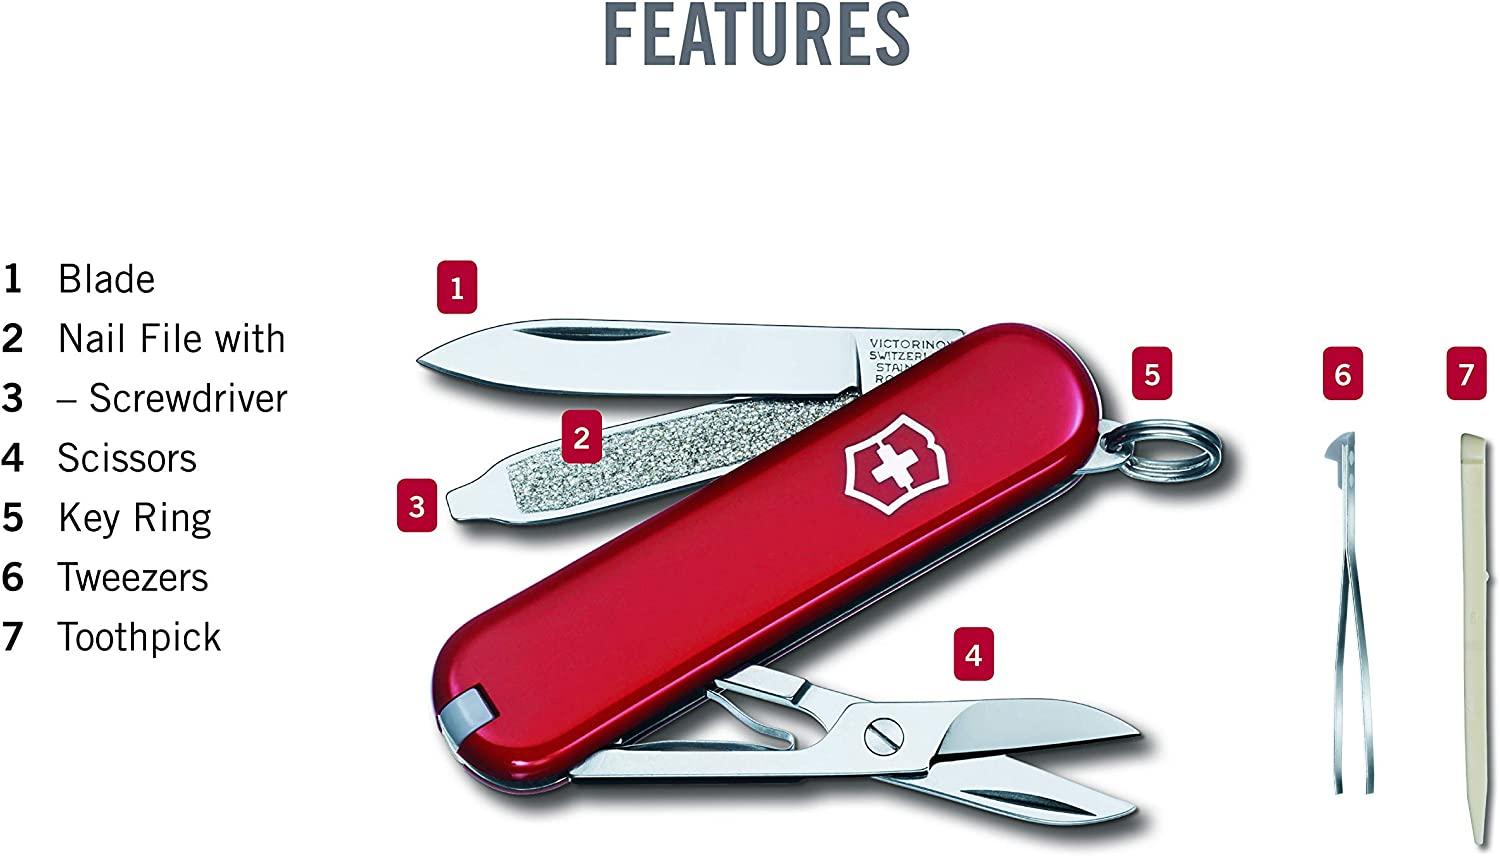 Victorinox Classic SD, red  Advantageously shopping at